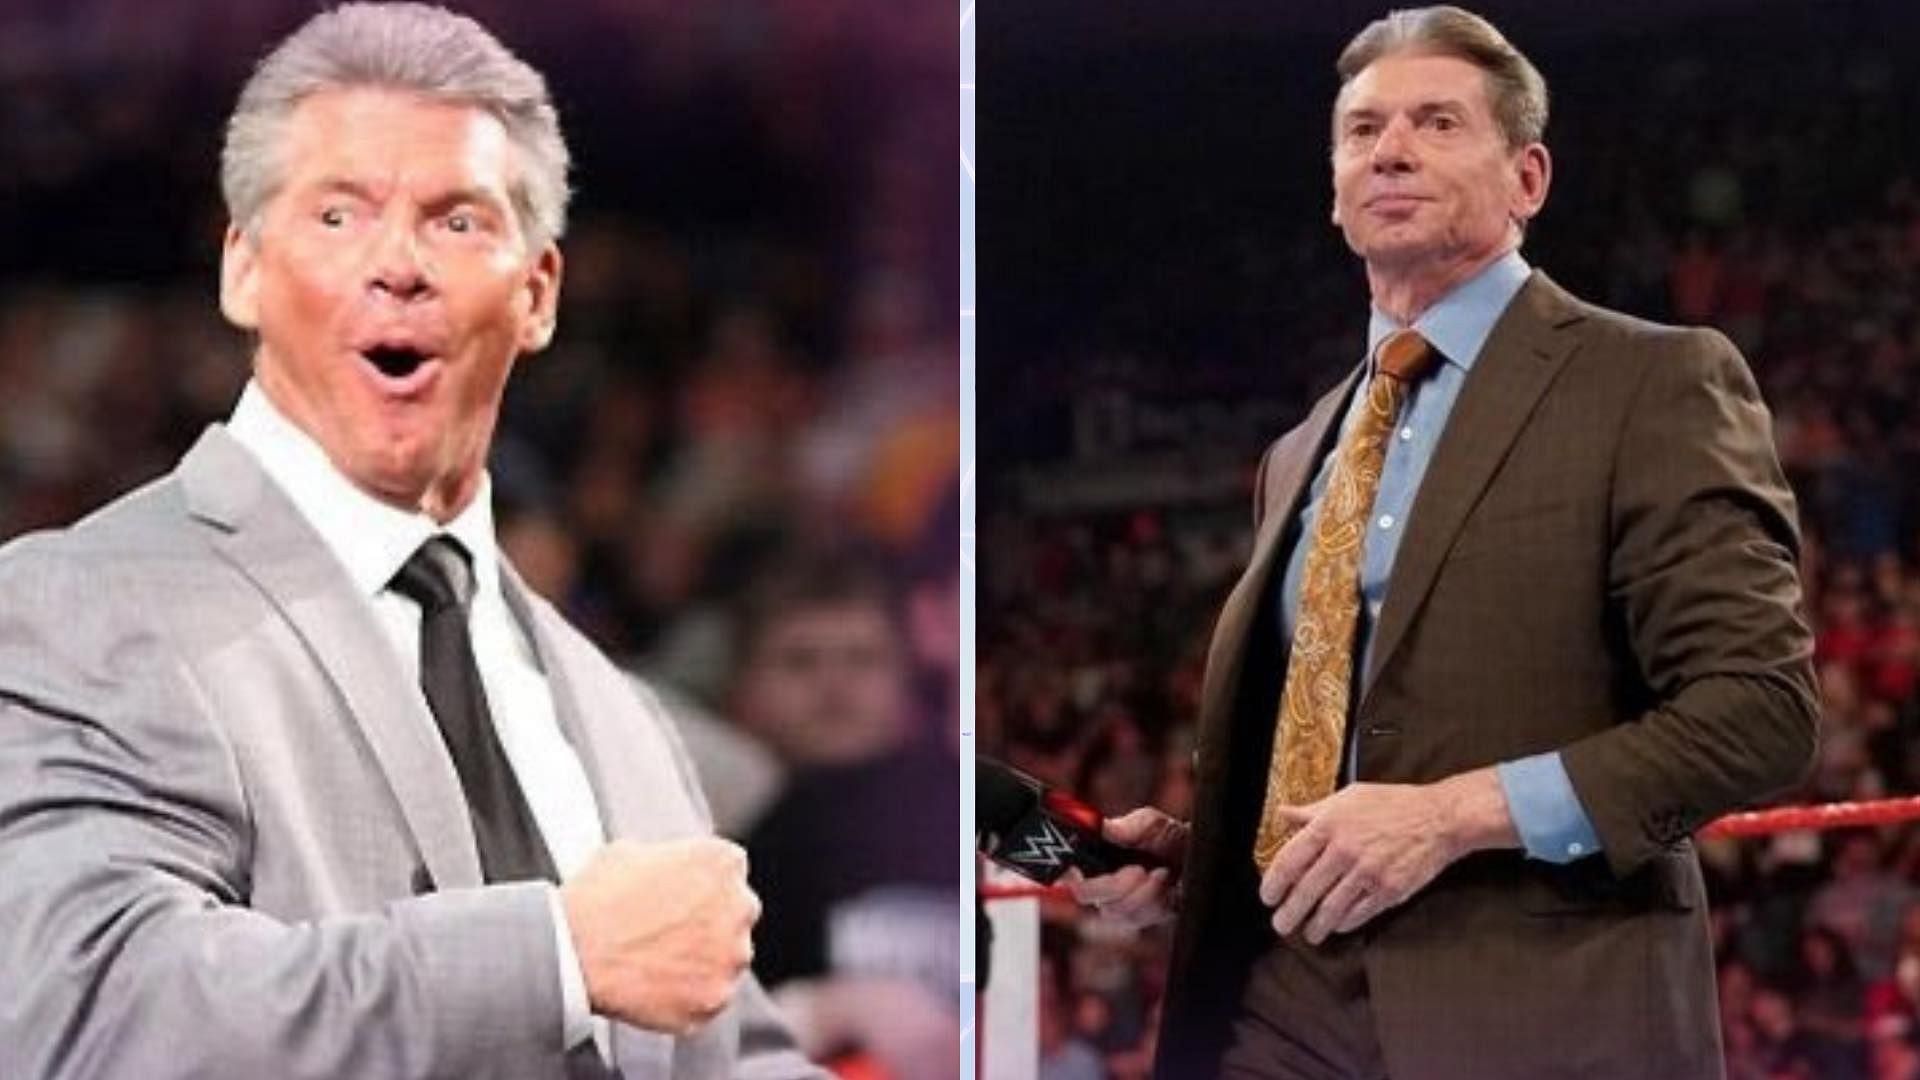 The WWE Chairman had an extremely important show tonight